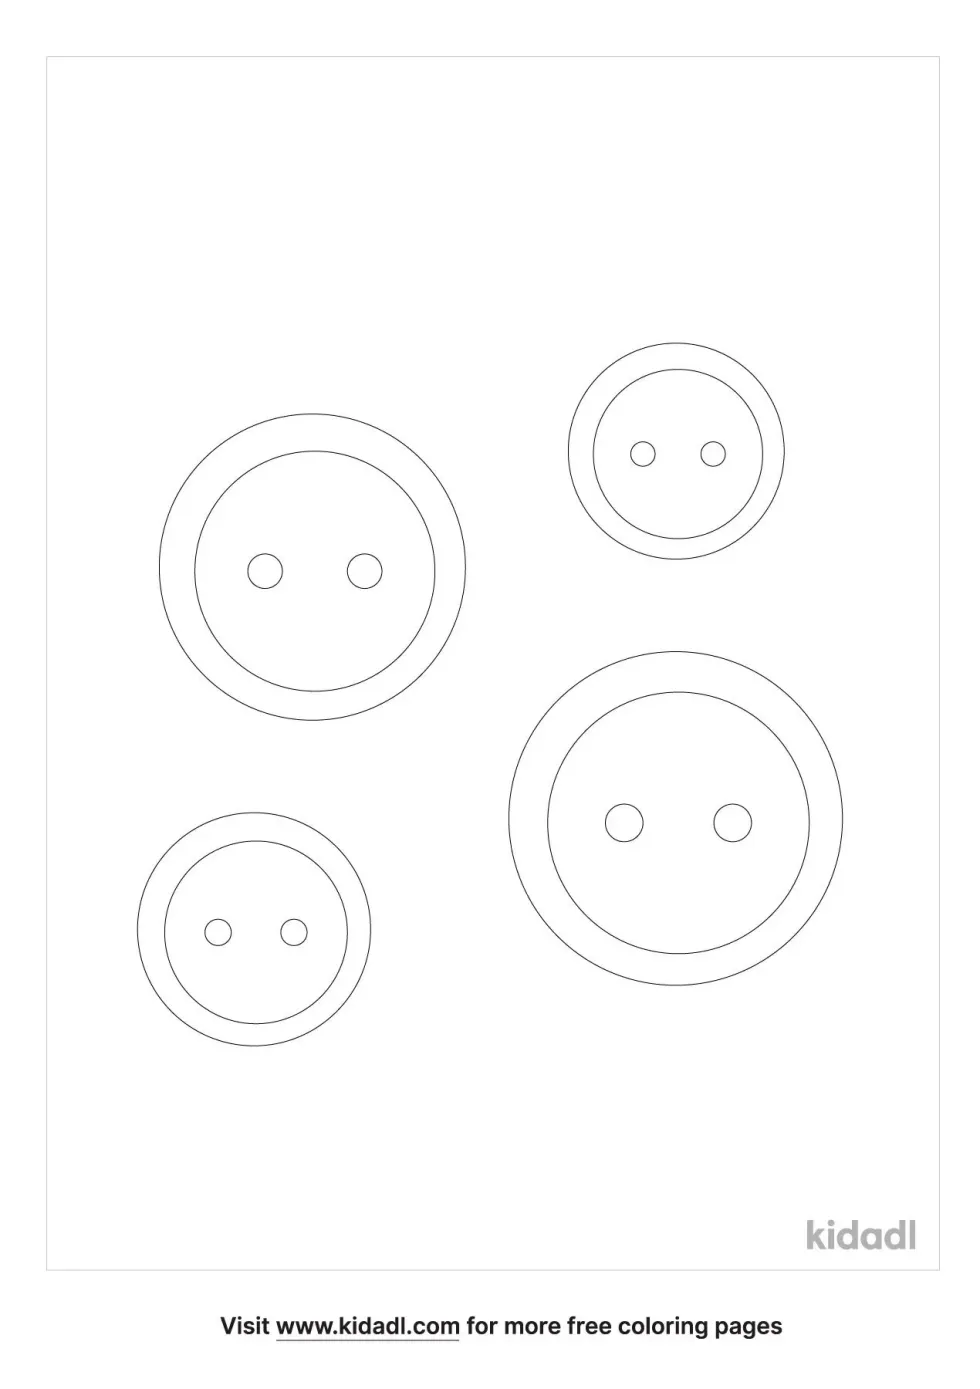 Button Coloring Page